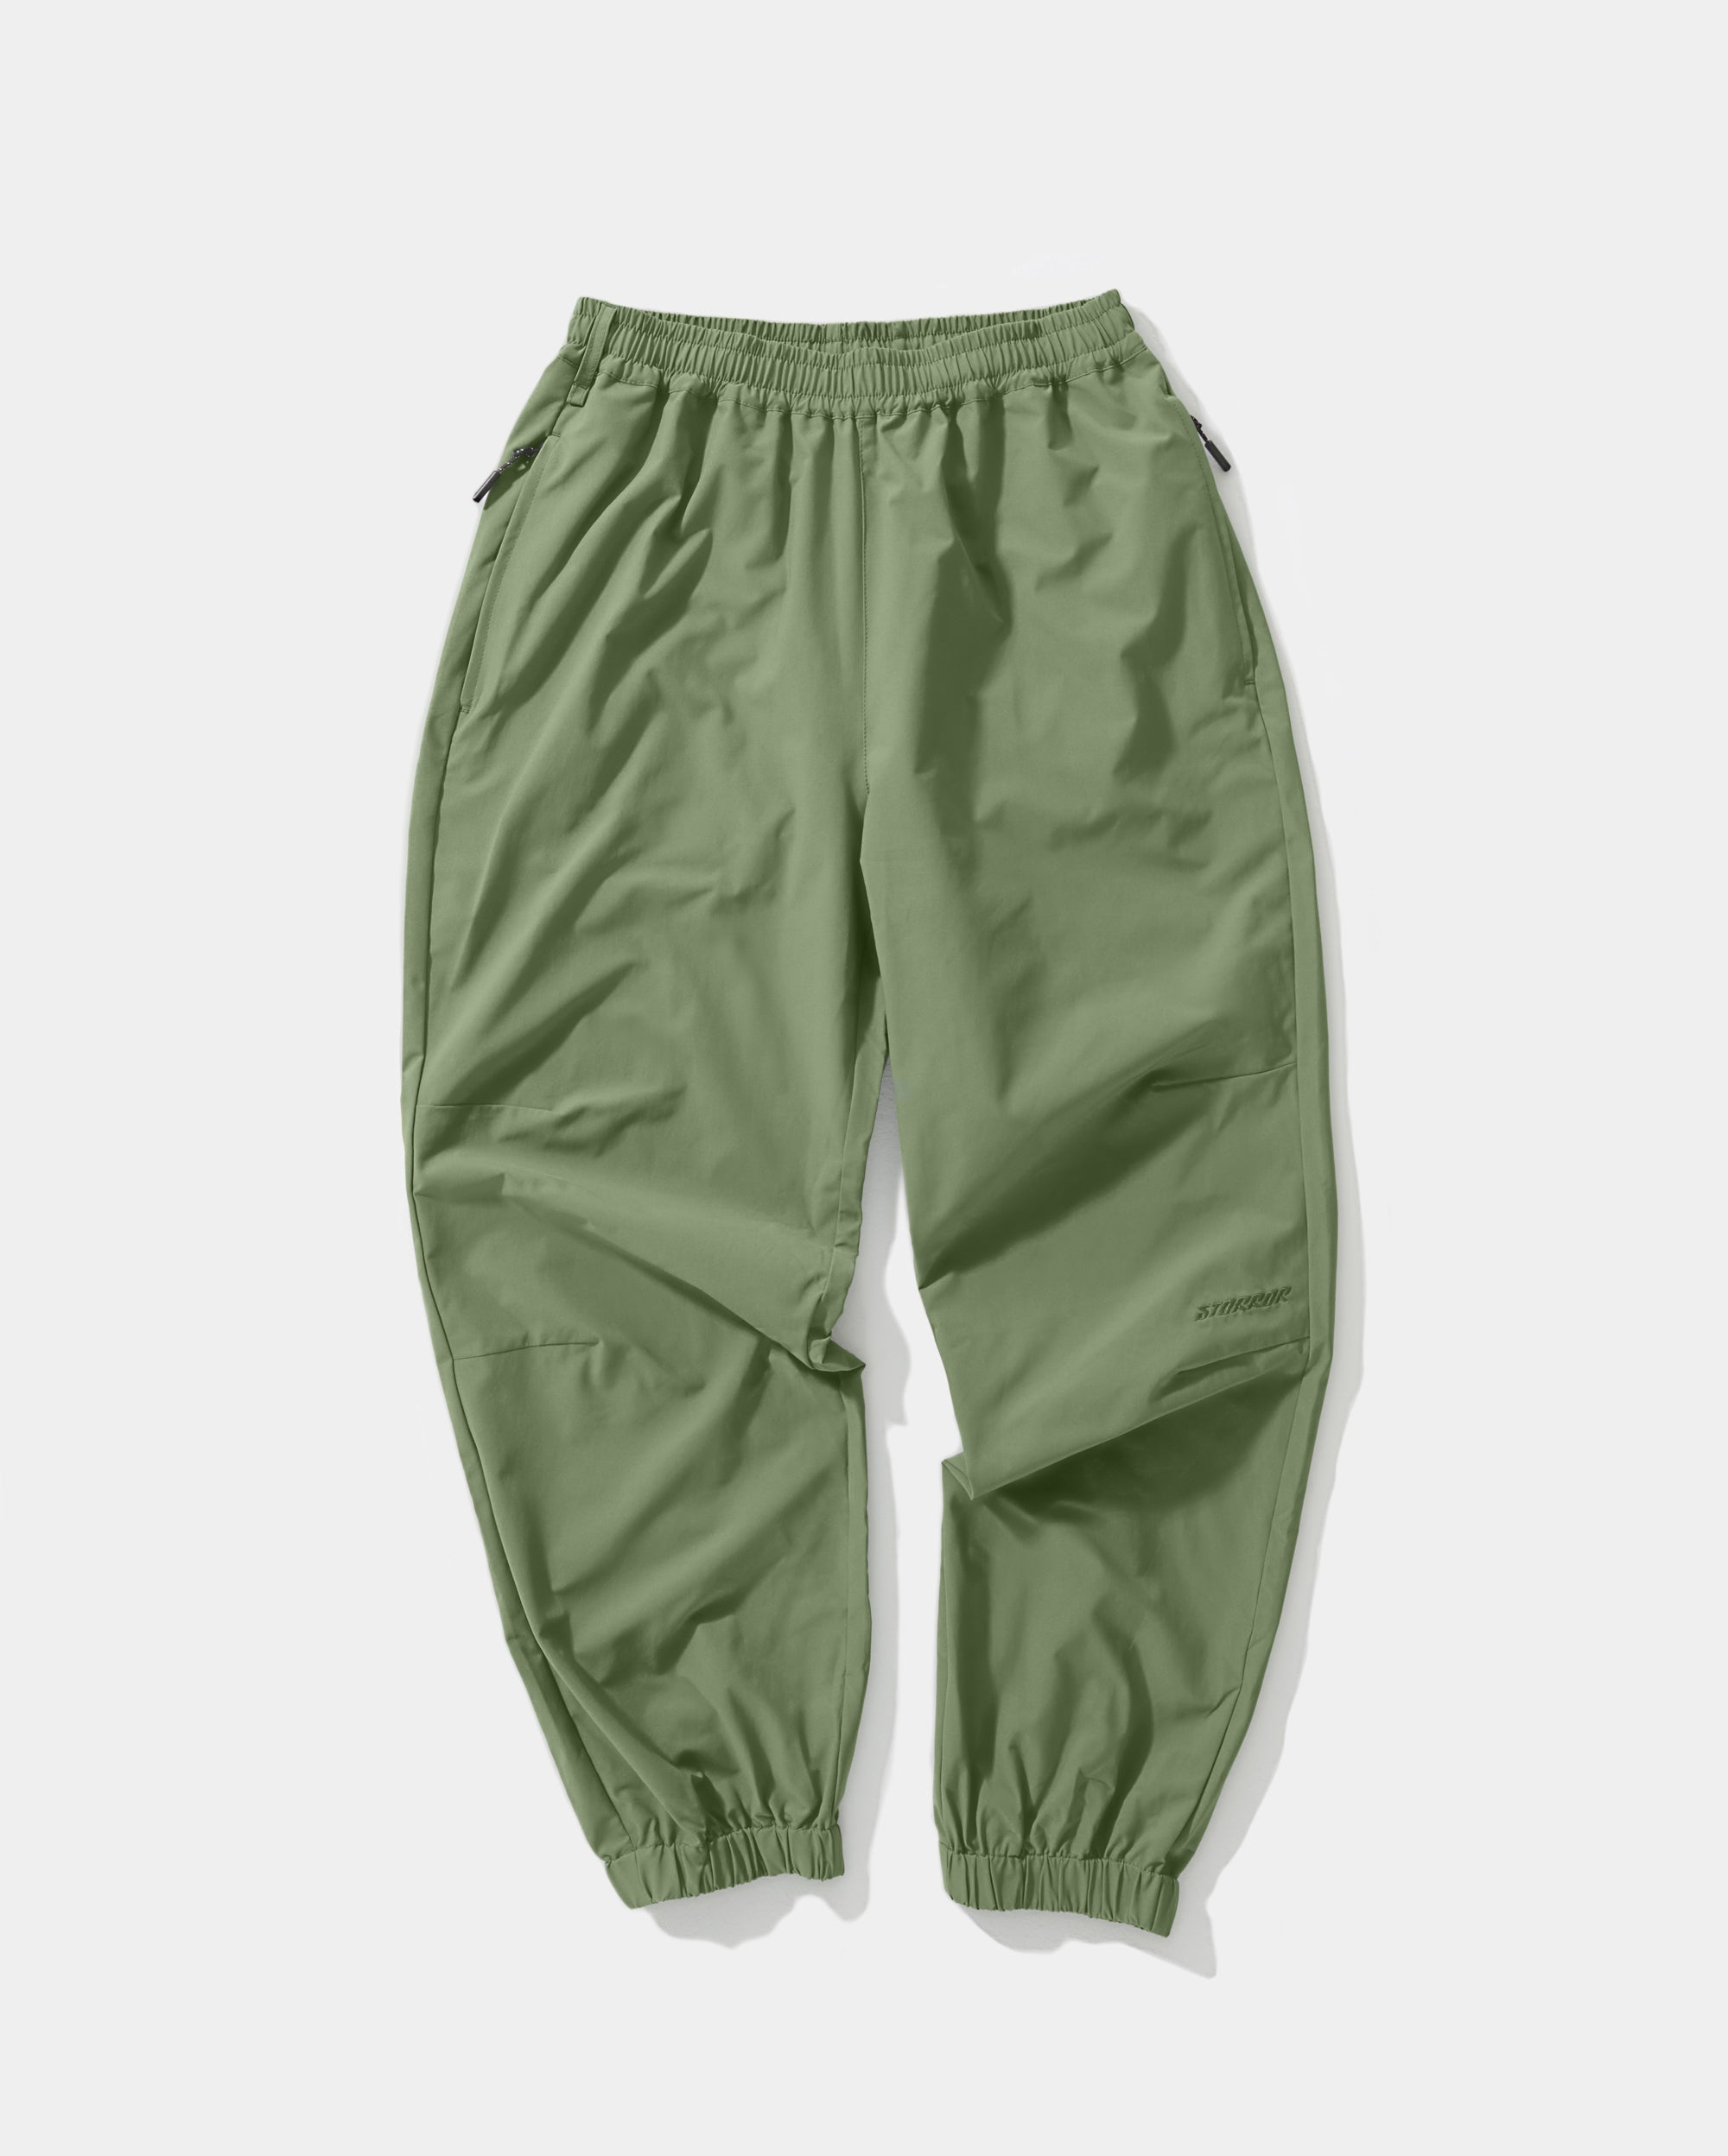 Mens Cargo Work Pants With Multi Pockets Cotton Outdoor Parkour Trousers  For Men Flipkart Style 107 H1223 From Mengyang04, $28.1 | DHgate.Com